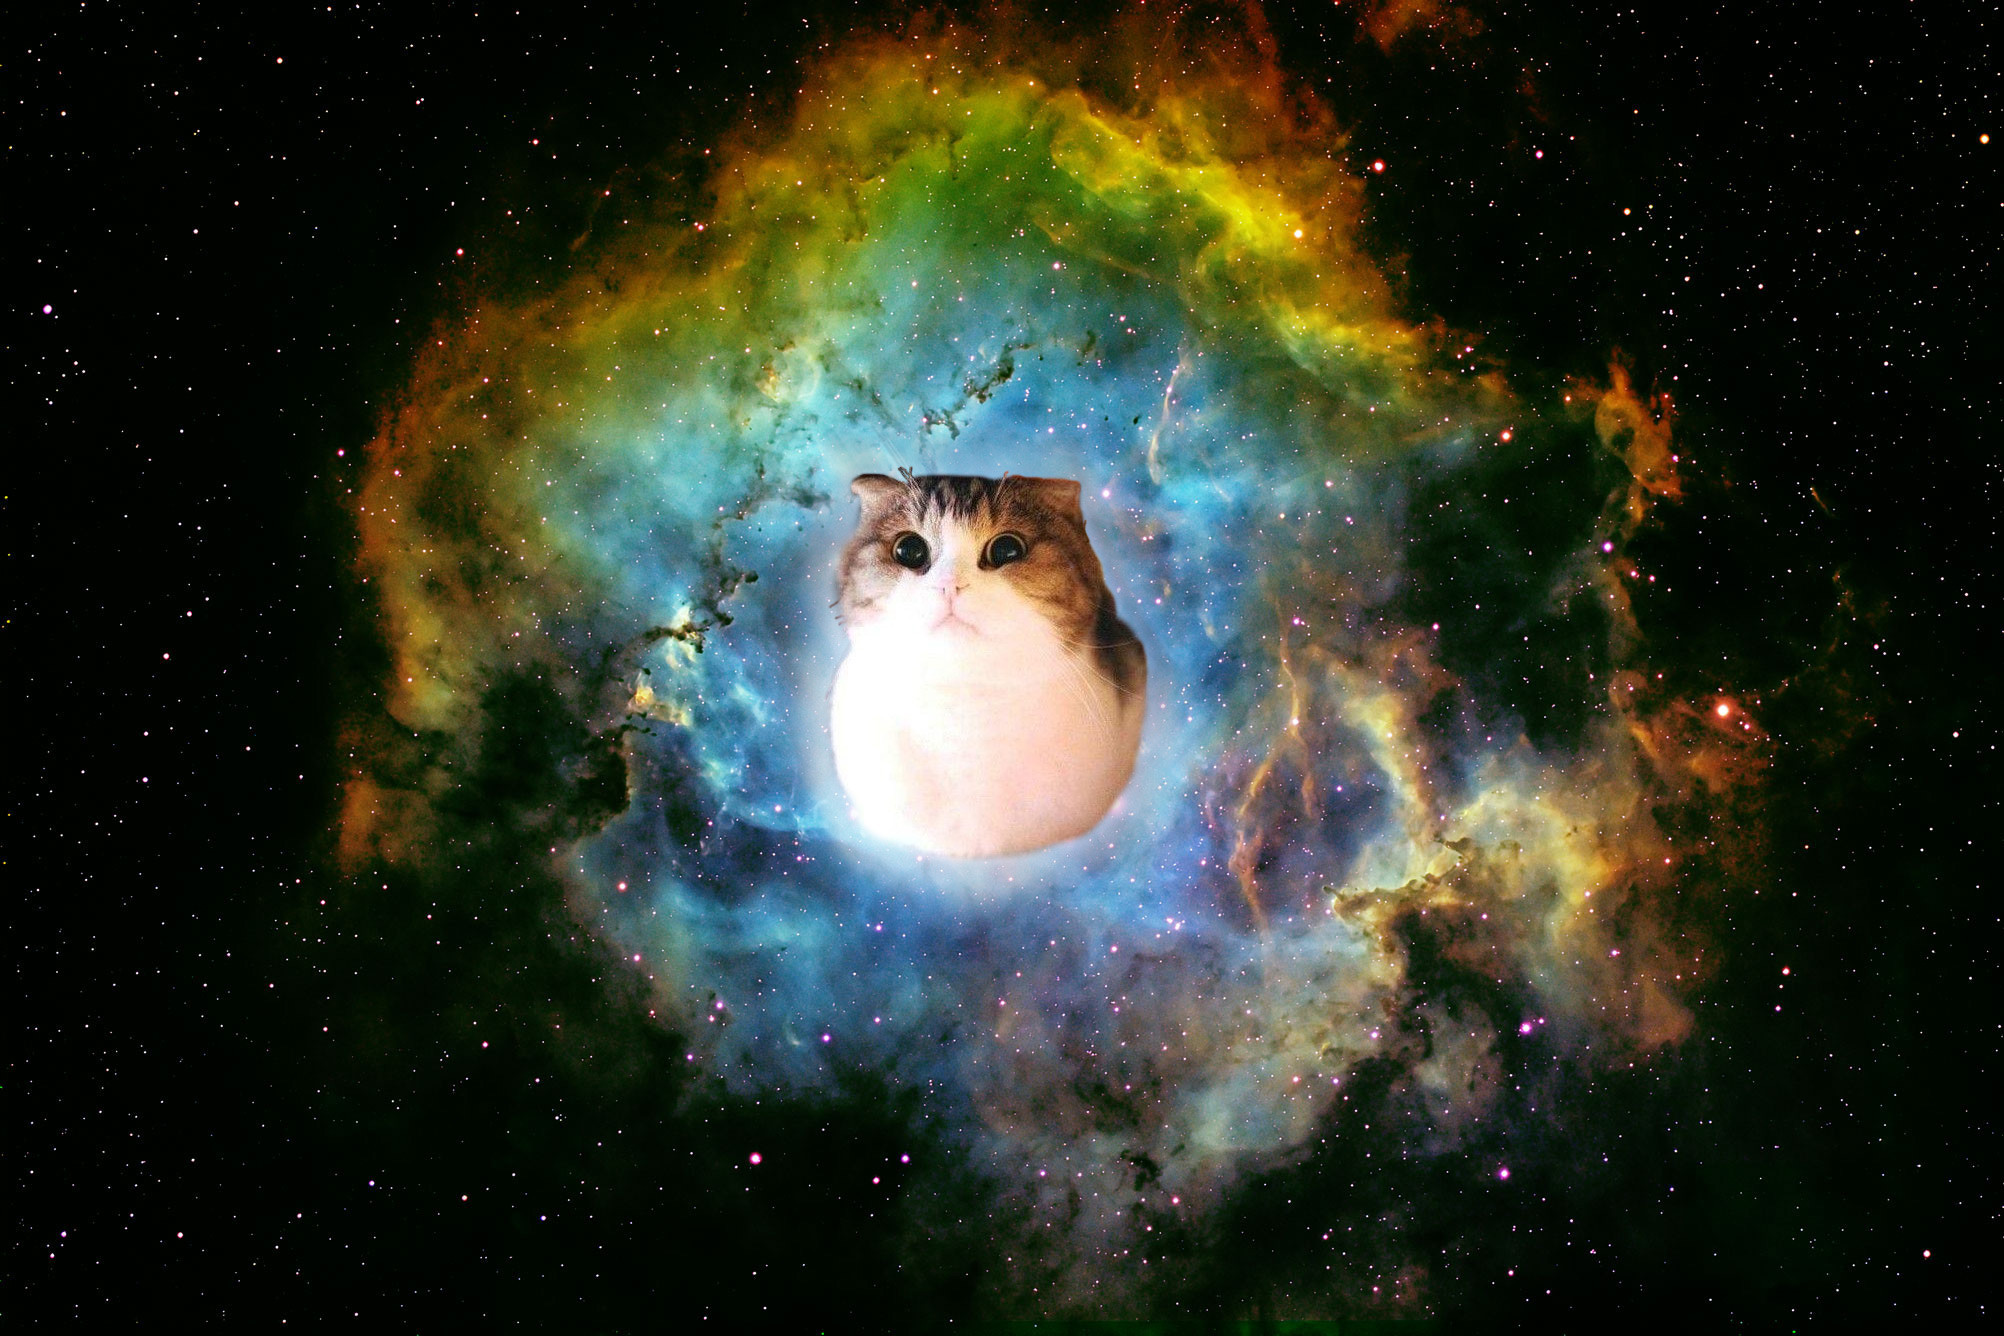 Cat In Space Wallpaper  1032x774  ID23458  Cats Space cat Funny cute  cats